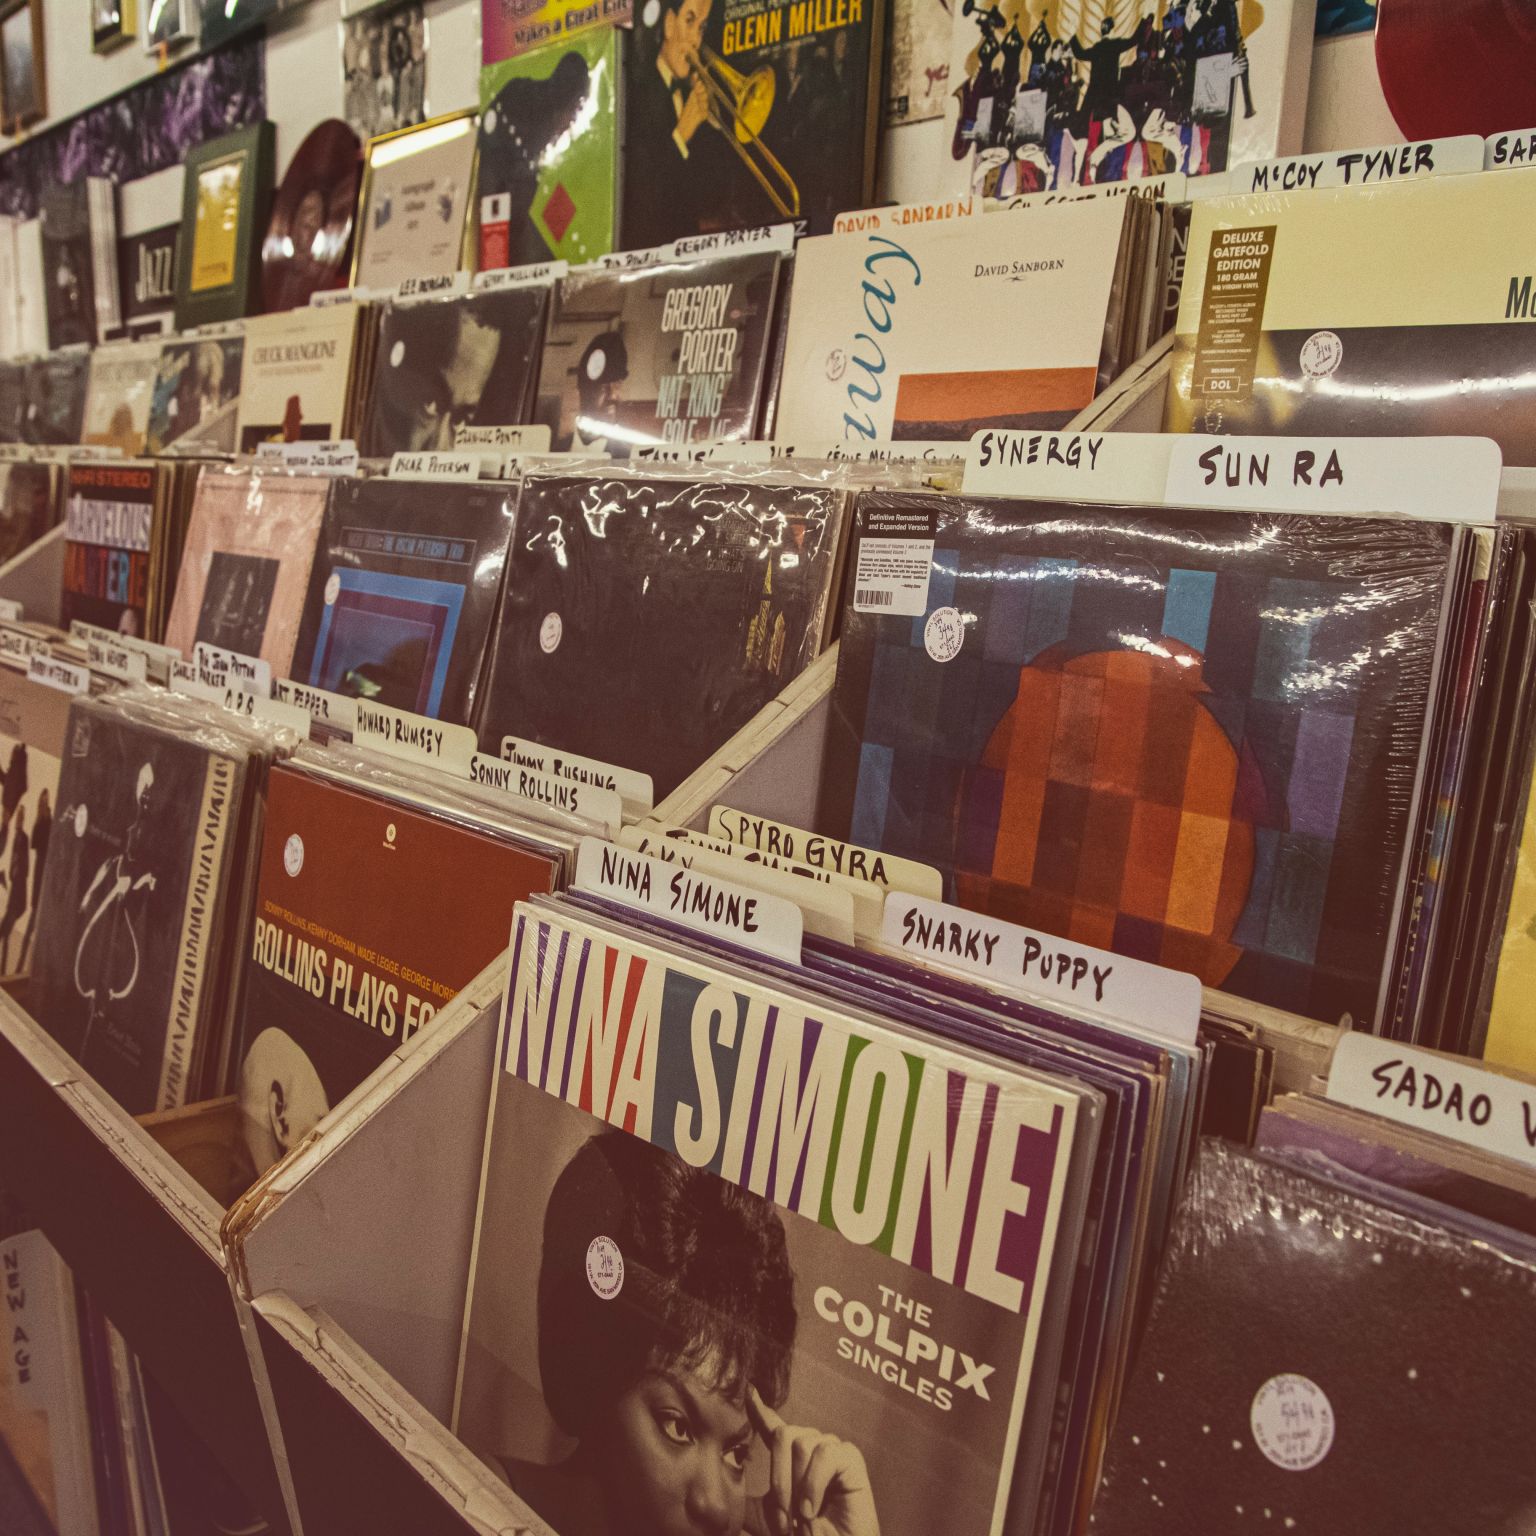 A view of vinyl jazz records in a record store including Nina Simone.